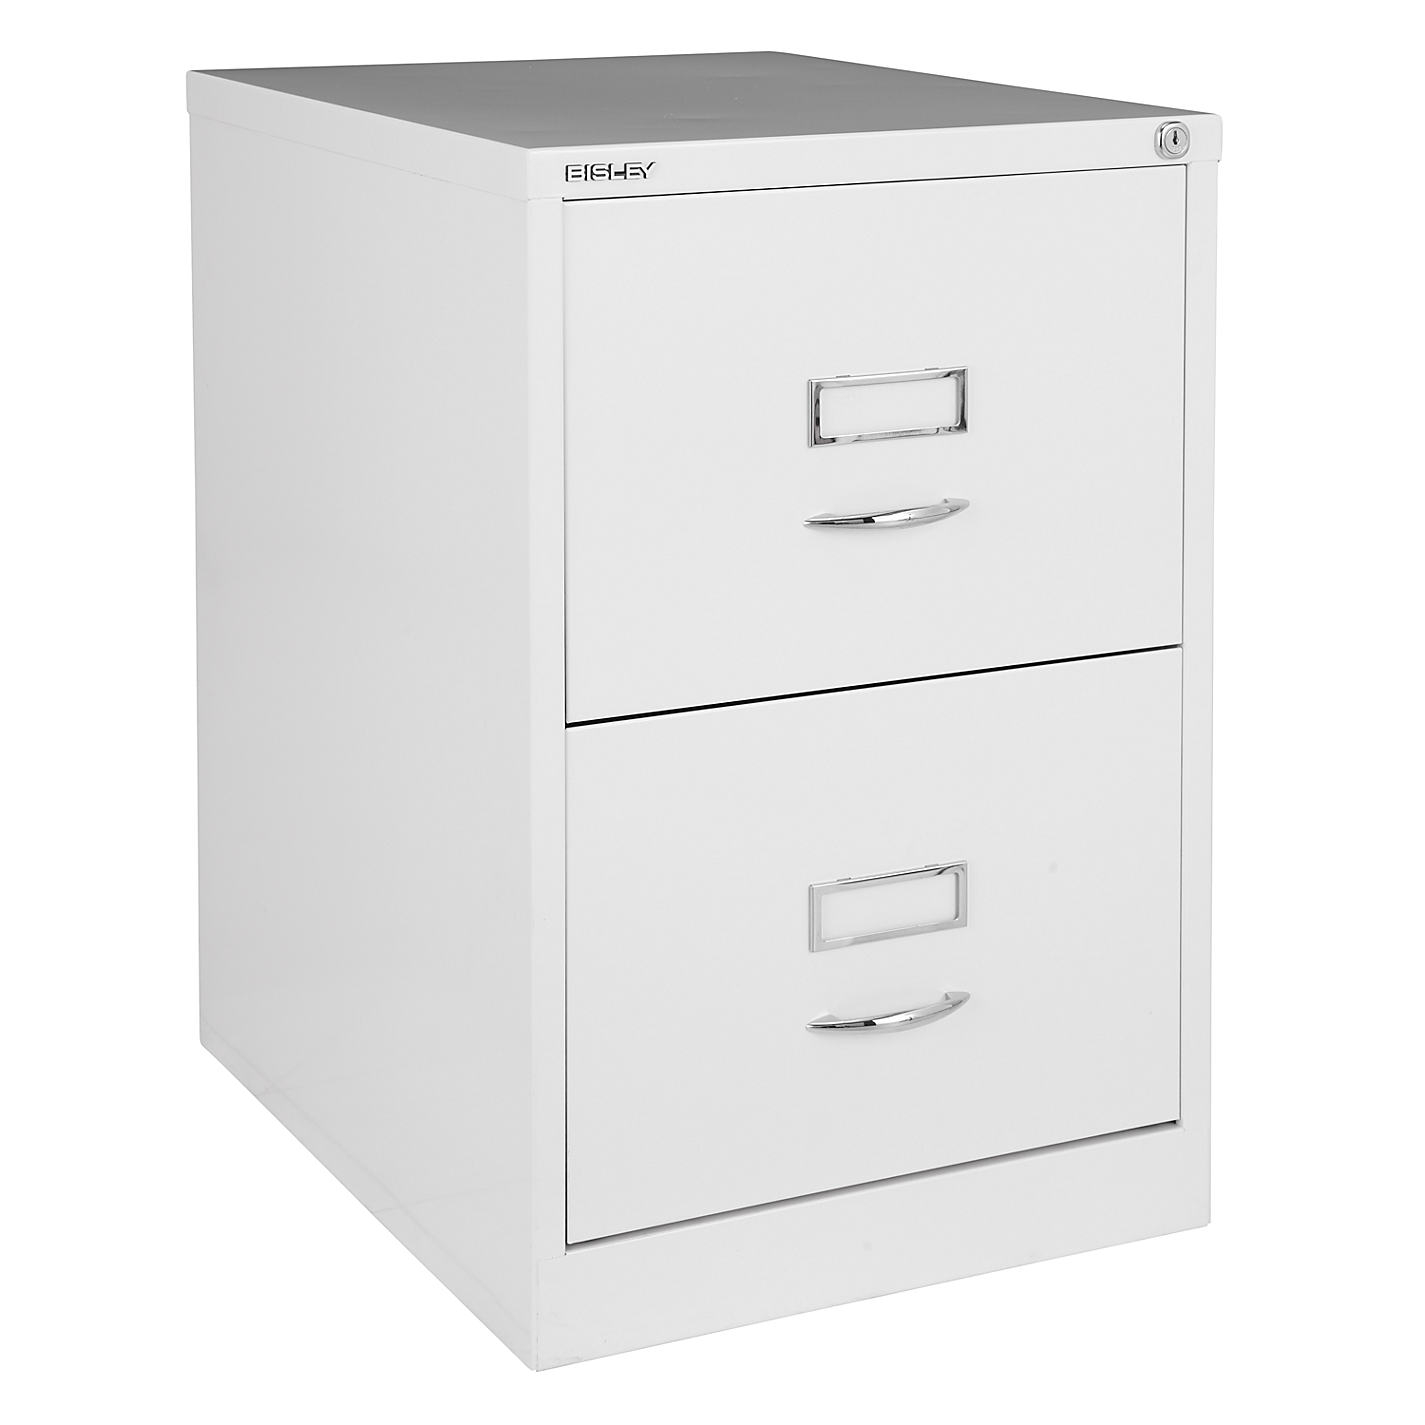 Incredible Small Metal Filing Cabinet Hon Filing Cabinets Old Filing with dimensions 1425 X 1425